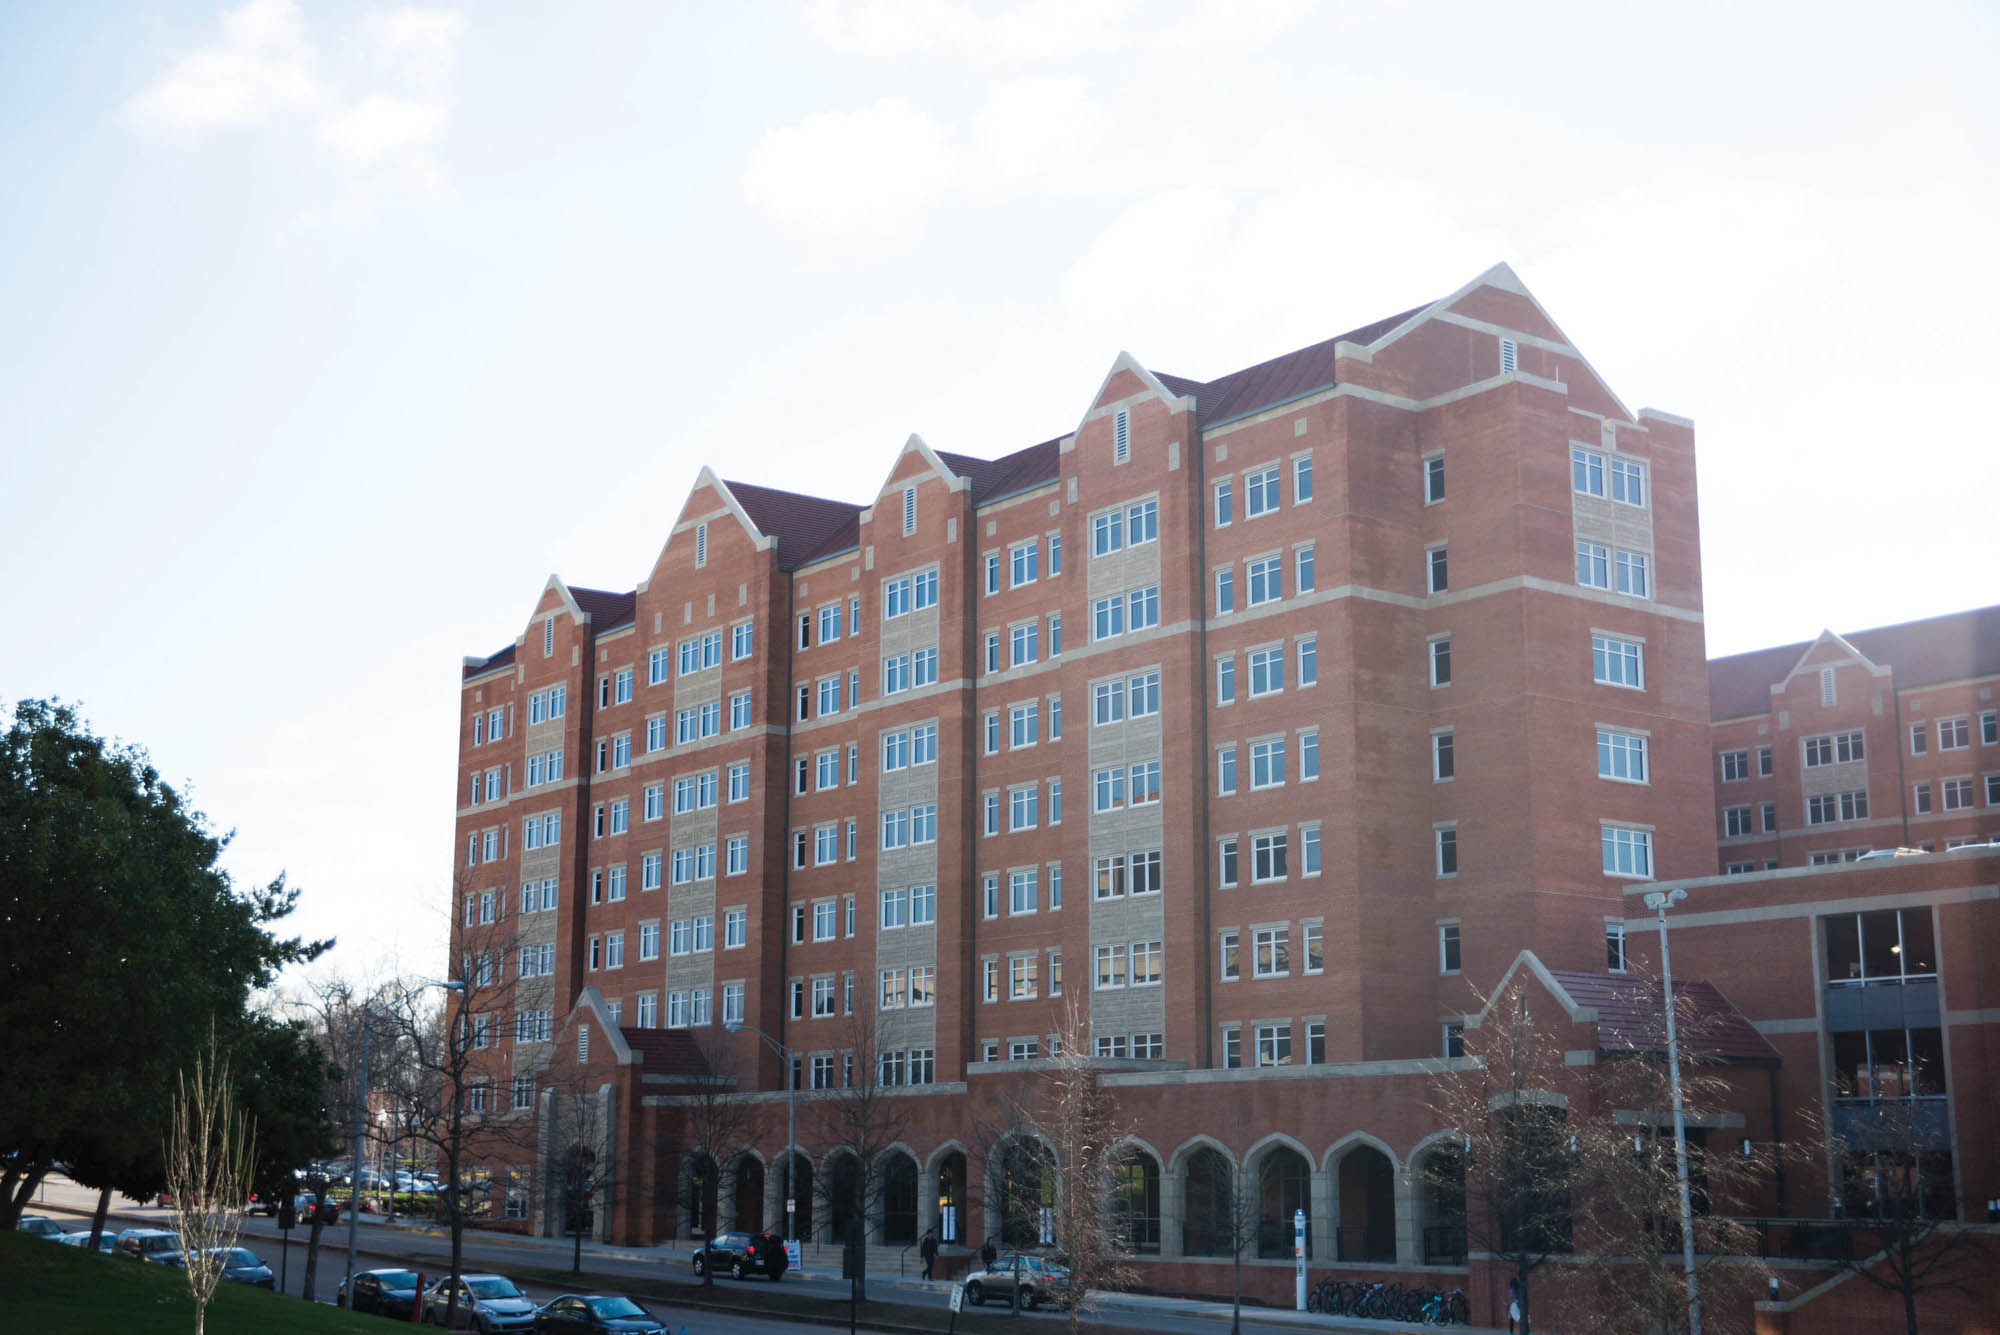 Stokely Hall seen here on March 2, 2017. (Rae Sturm / University of Tennessee)